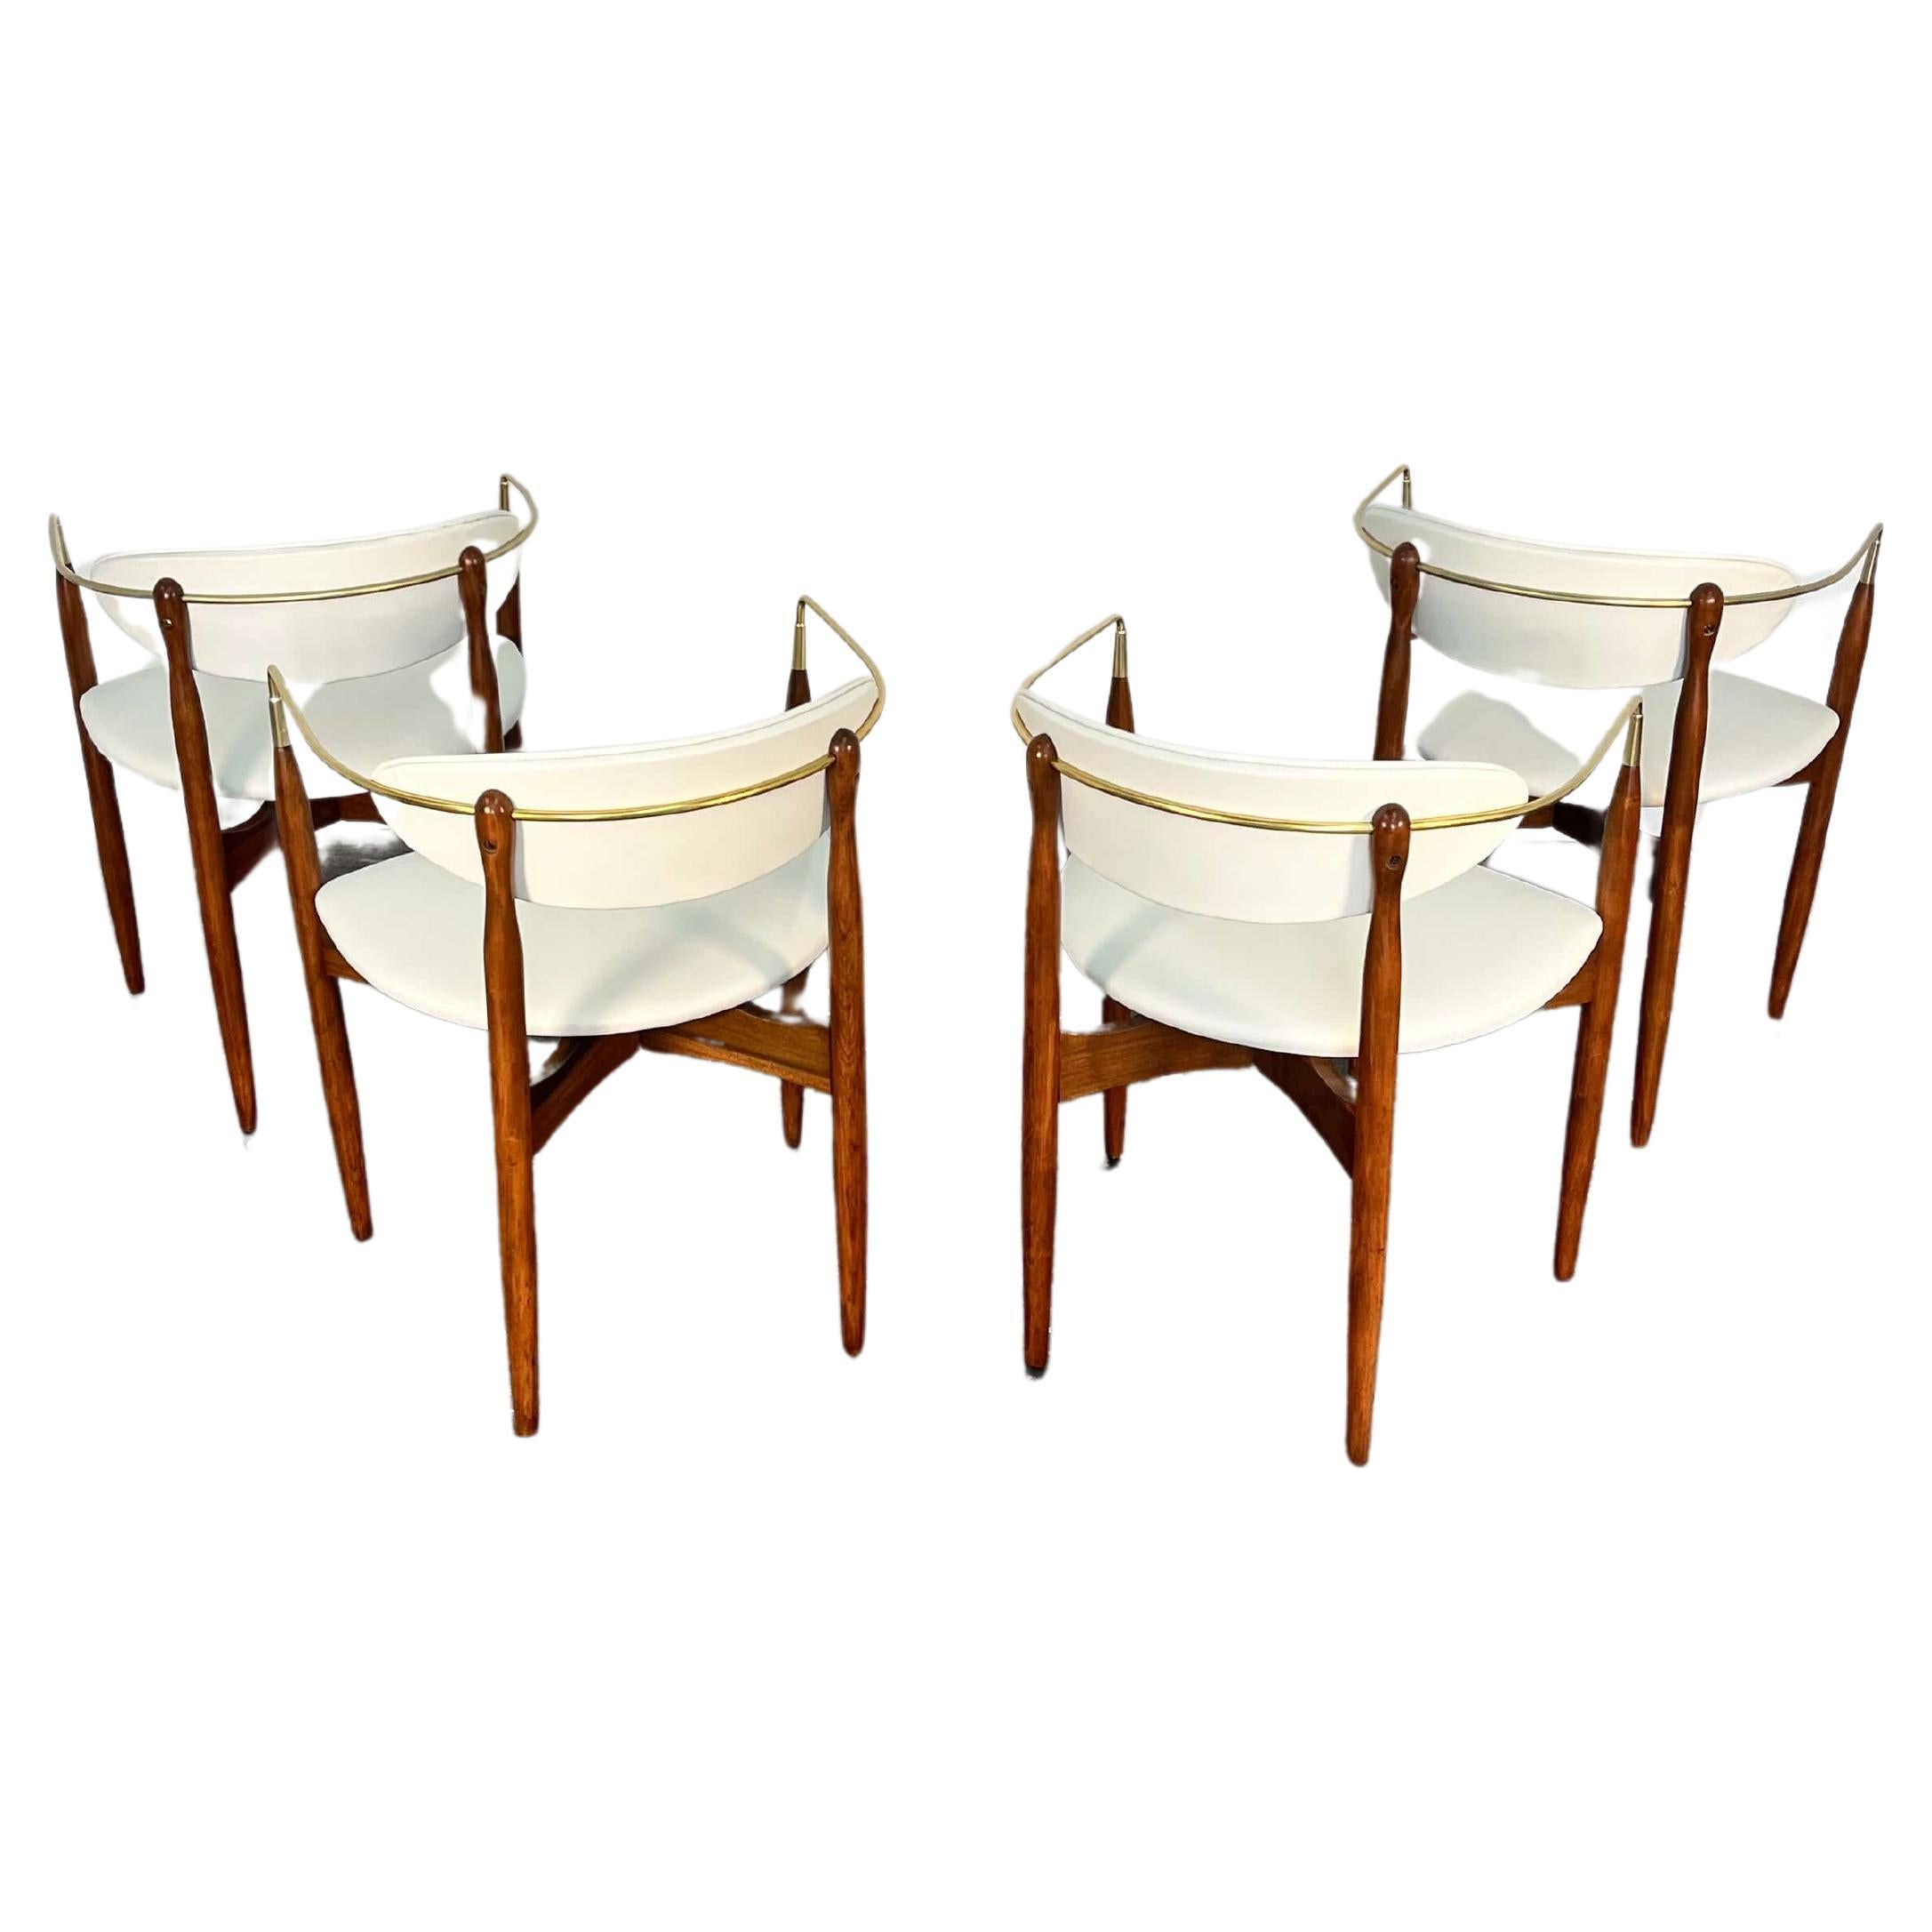 Mid-20th Century Dan Johnson for Selig Viscount Chairs in Leather Set of 4 For Sale